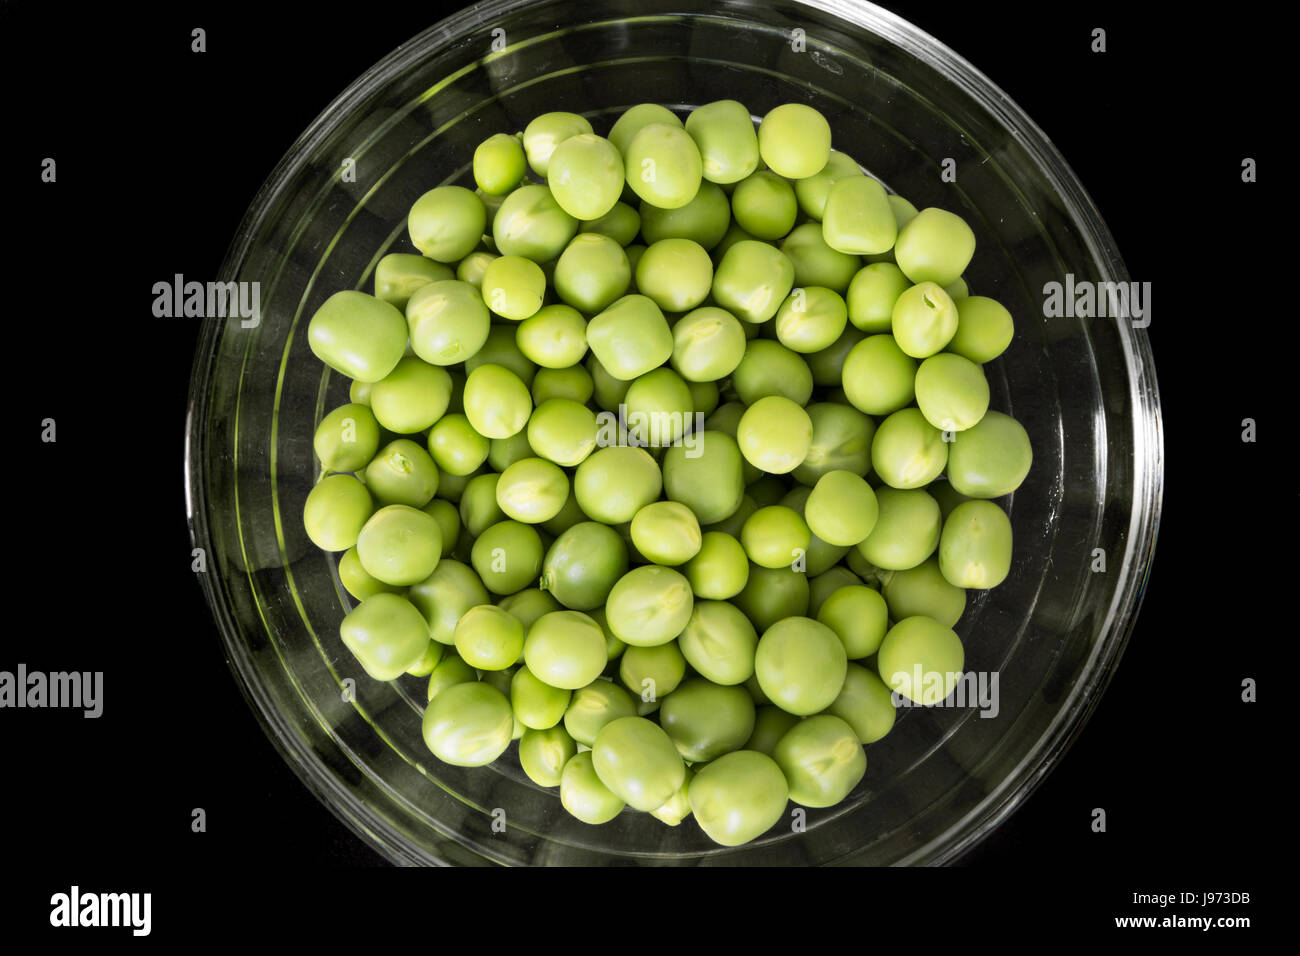 Green peas, freshly picked, in a glass bowl, on black background. Top view Stock Photo